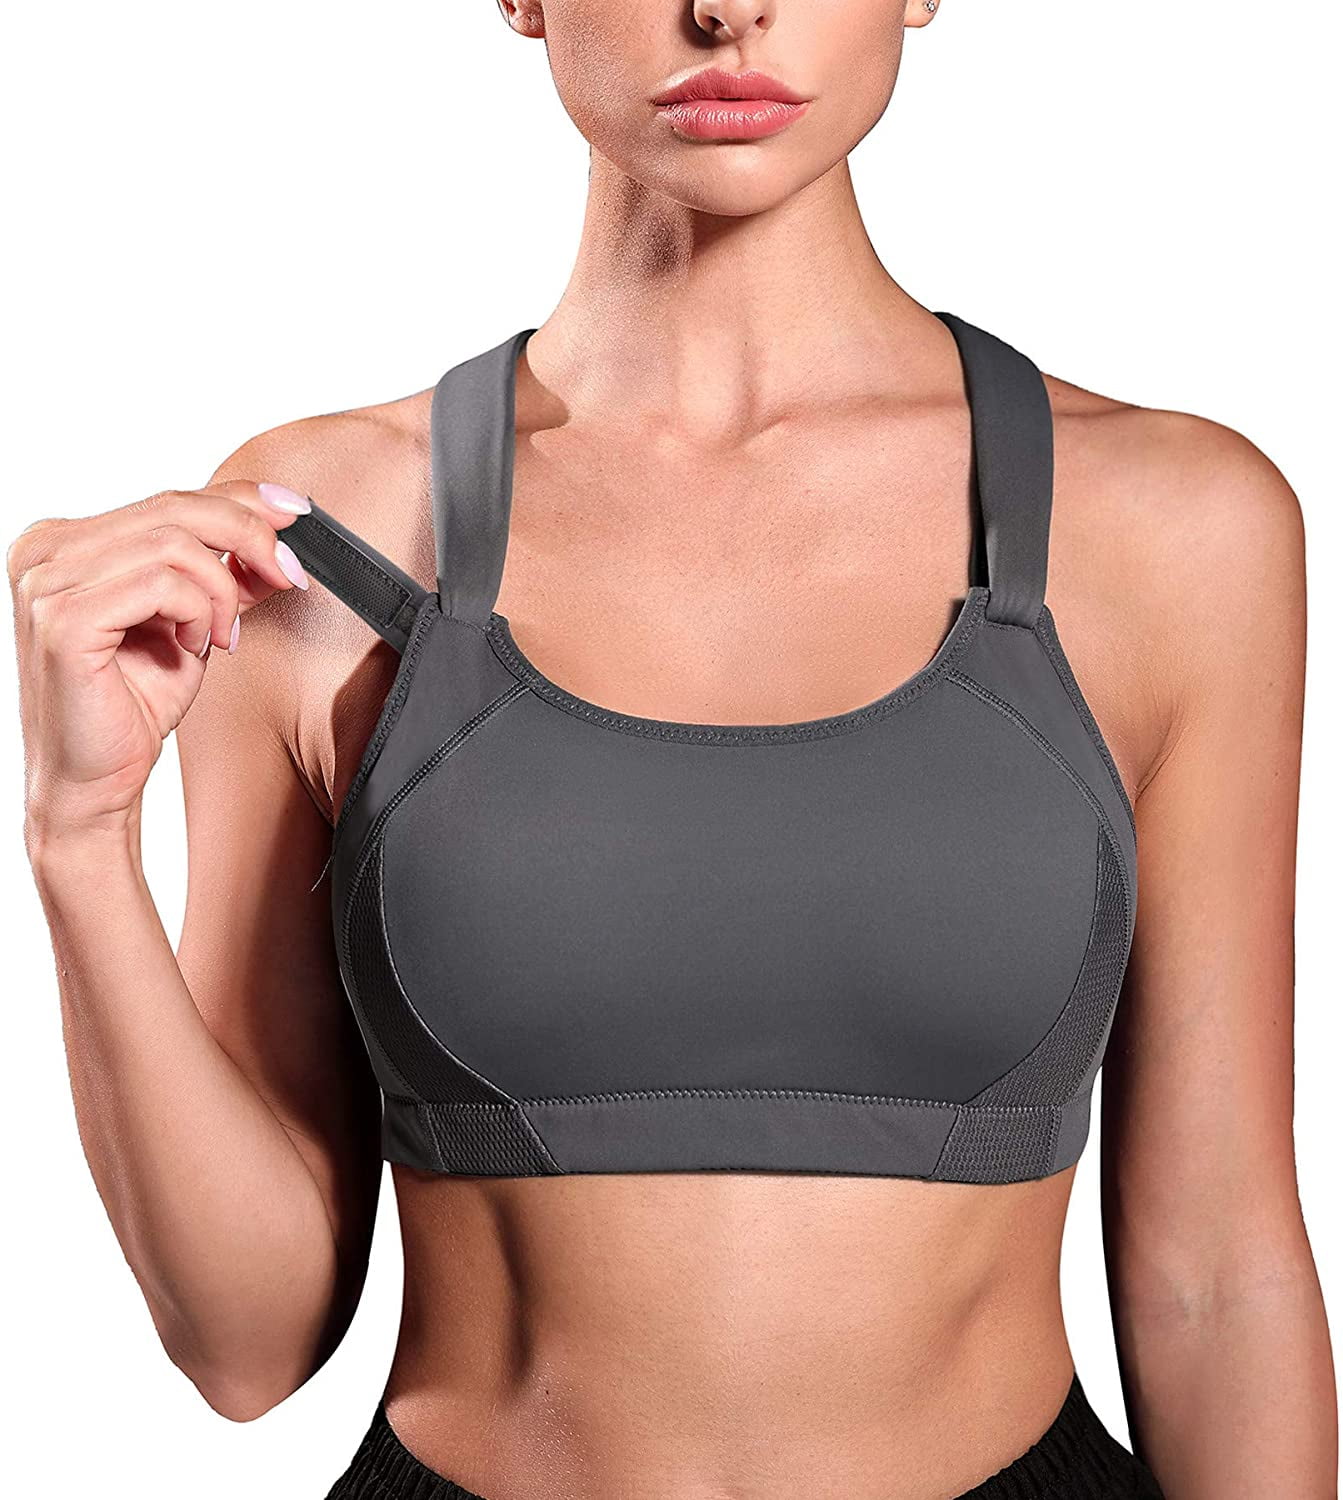 Nebility Women High Impact Support Sports Bras Criss Cross Back Bounce Control Wirefree Front Adjustable Straps